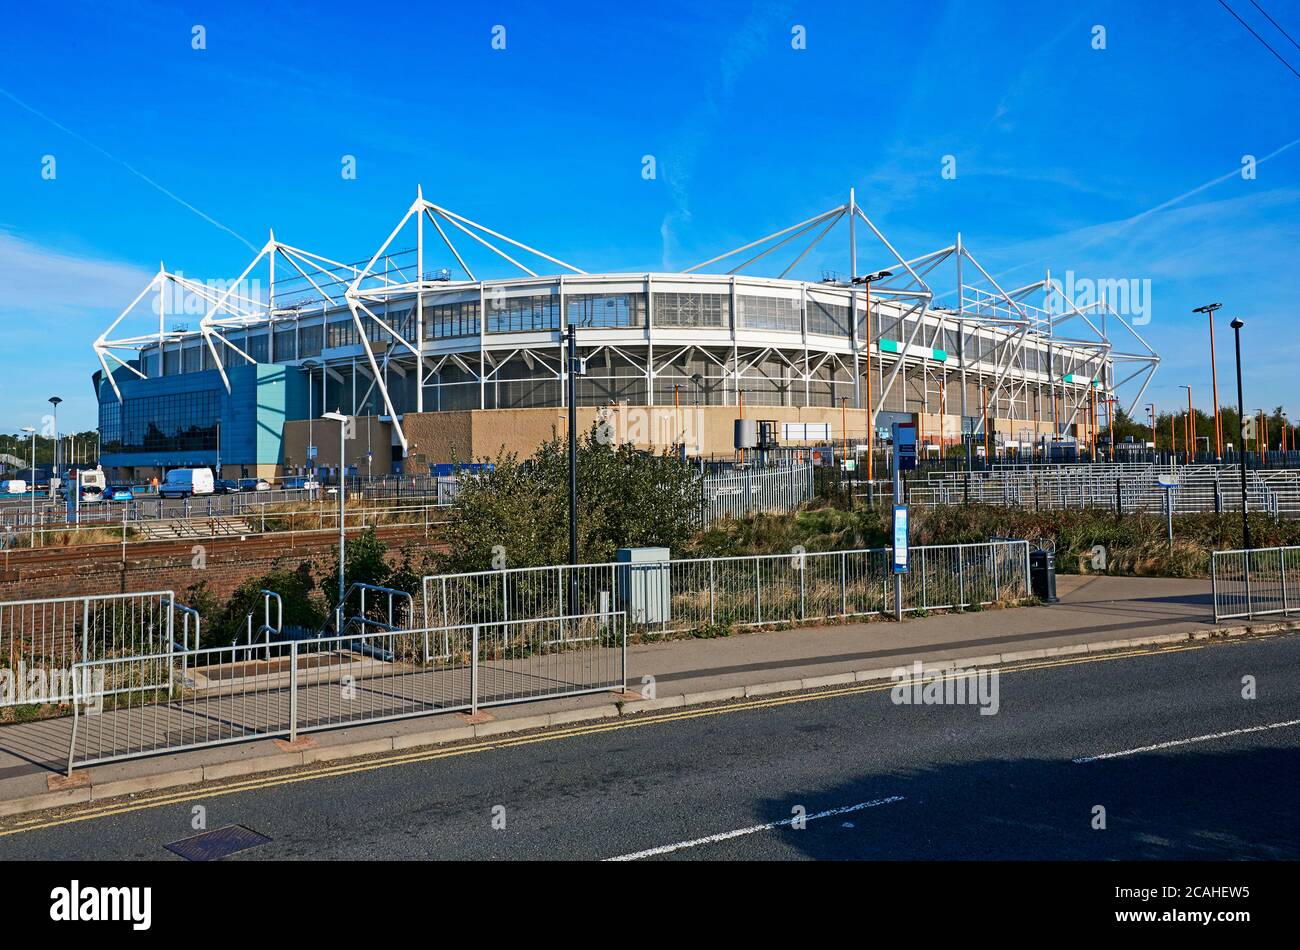 Facade of the 'Ricoh Arena' home of Coventry city football club Stock Photo